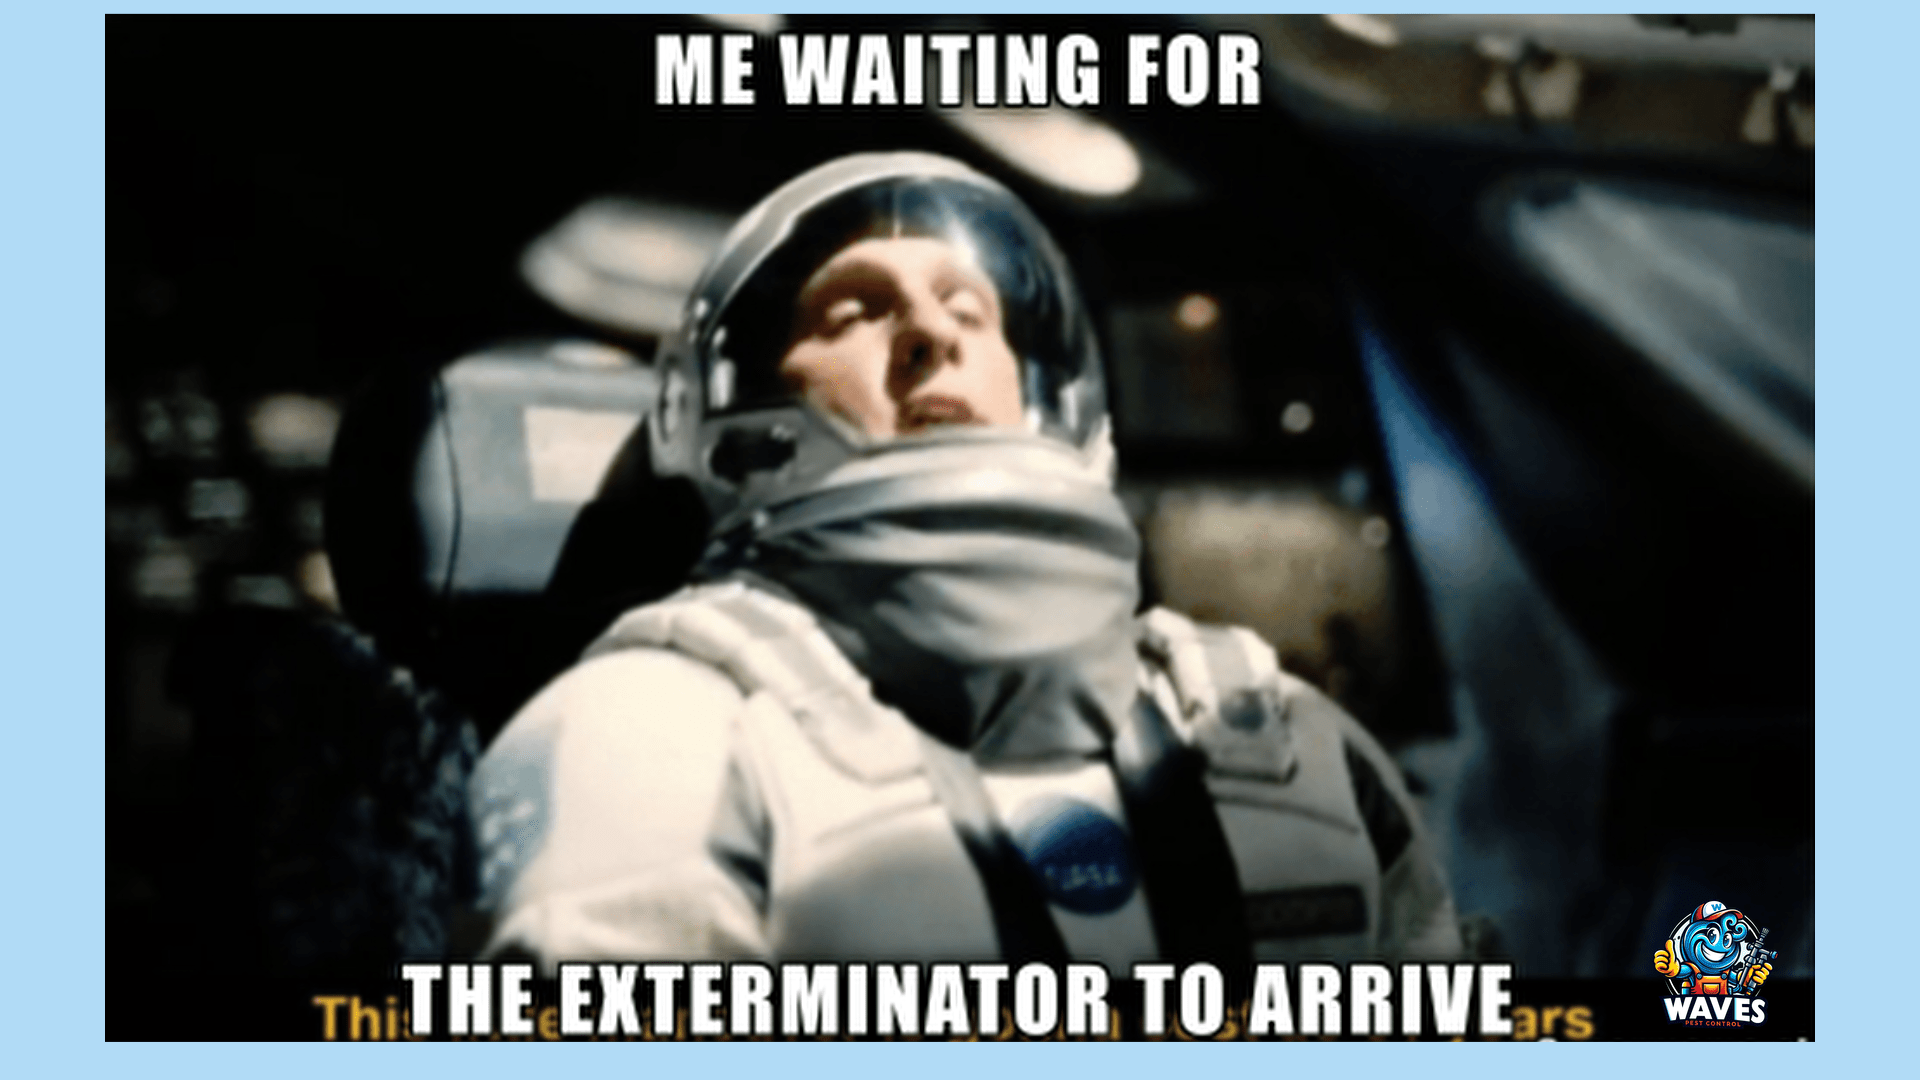 Astronaut in a helmet reclining with a weary expression, overlaid with the text 'me waiting for the exterminator to arrive. ' meme image with a humorous tone, referencing a delayed response, possibly for pest control services.